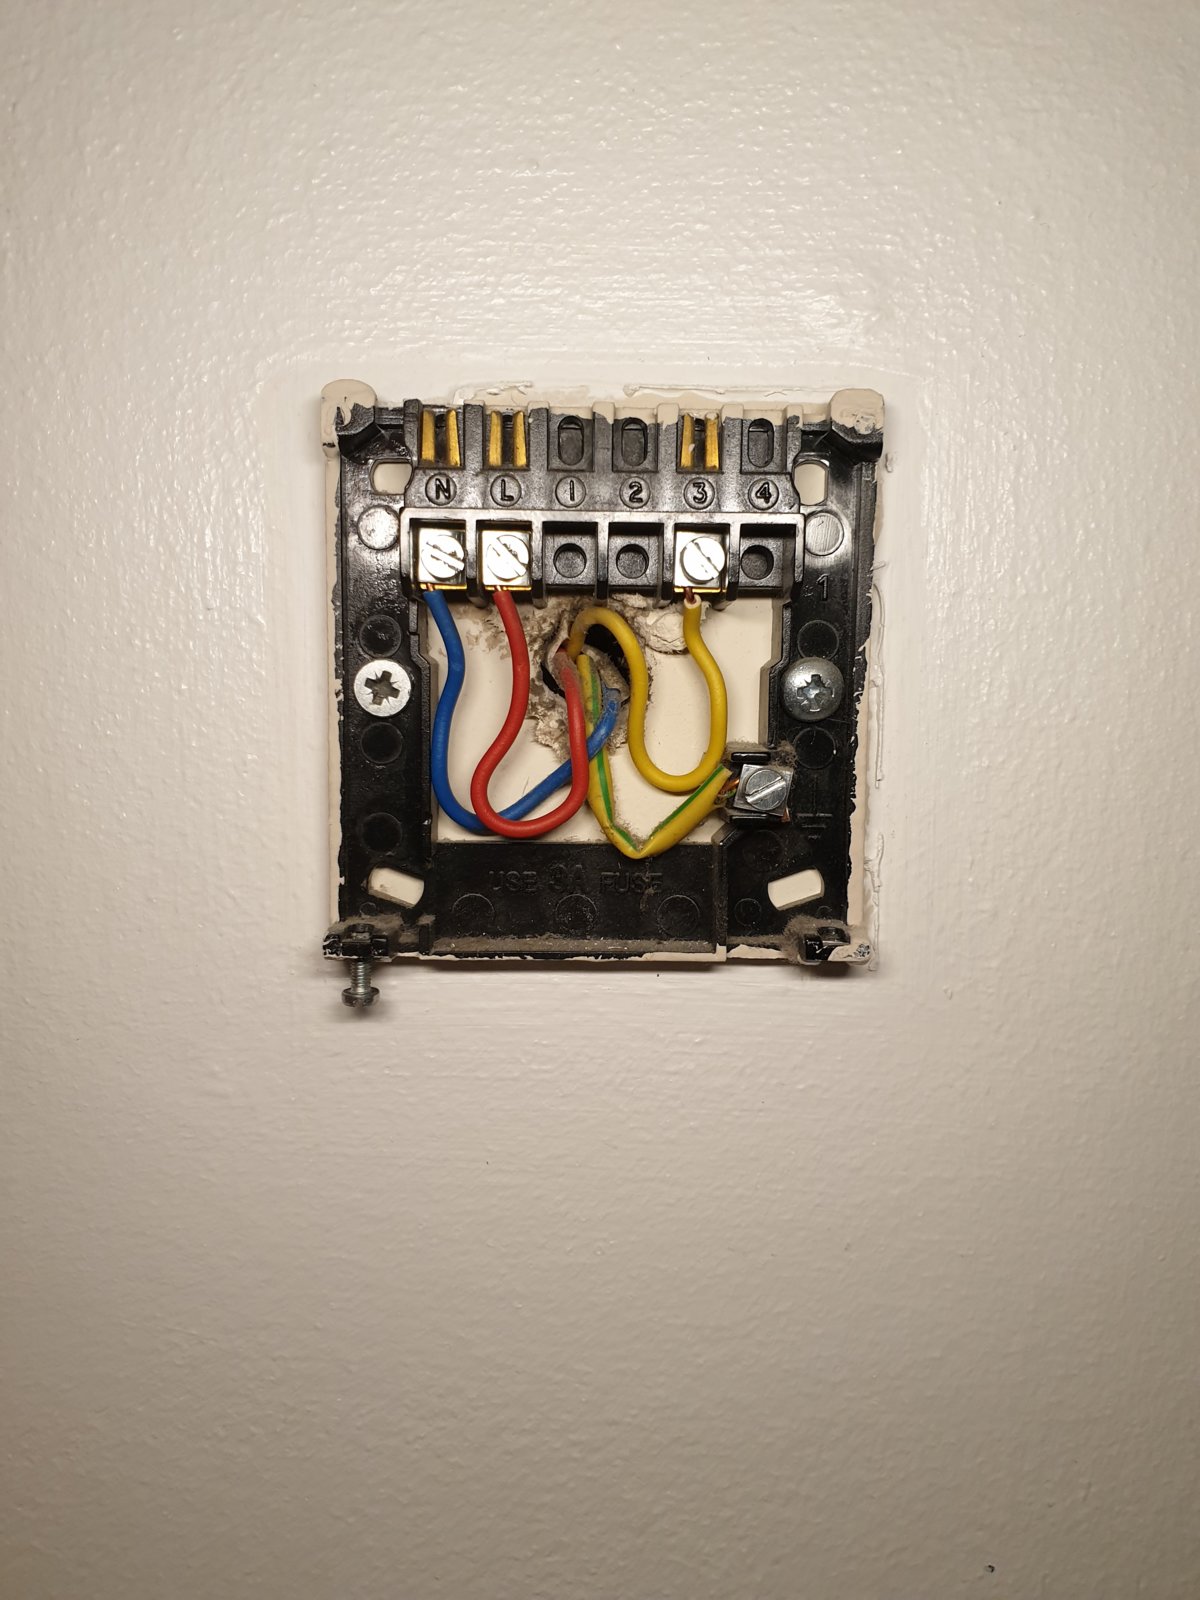 Swapping Drayton RTS1 for digital thermostat - Wiring ...